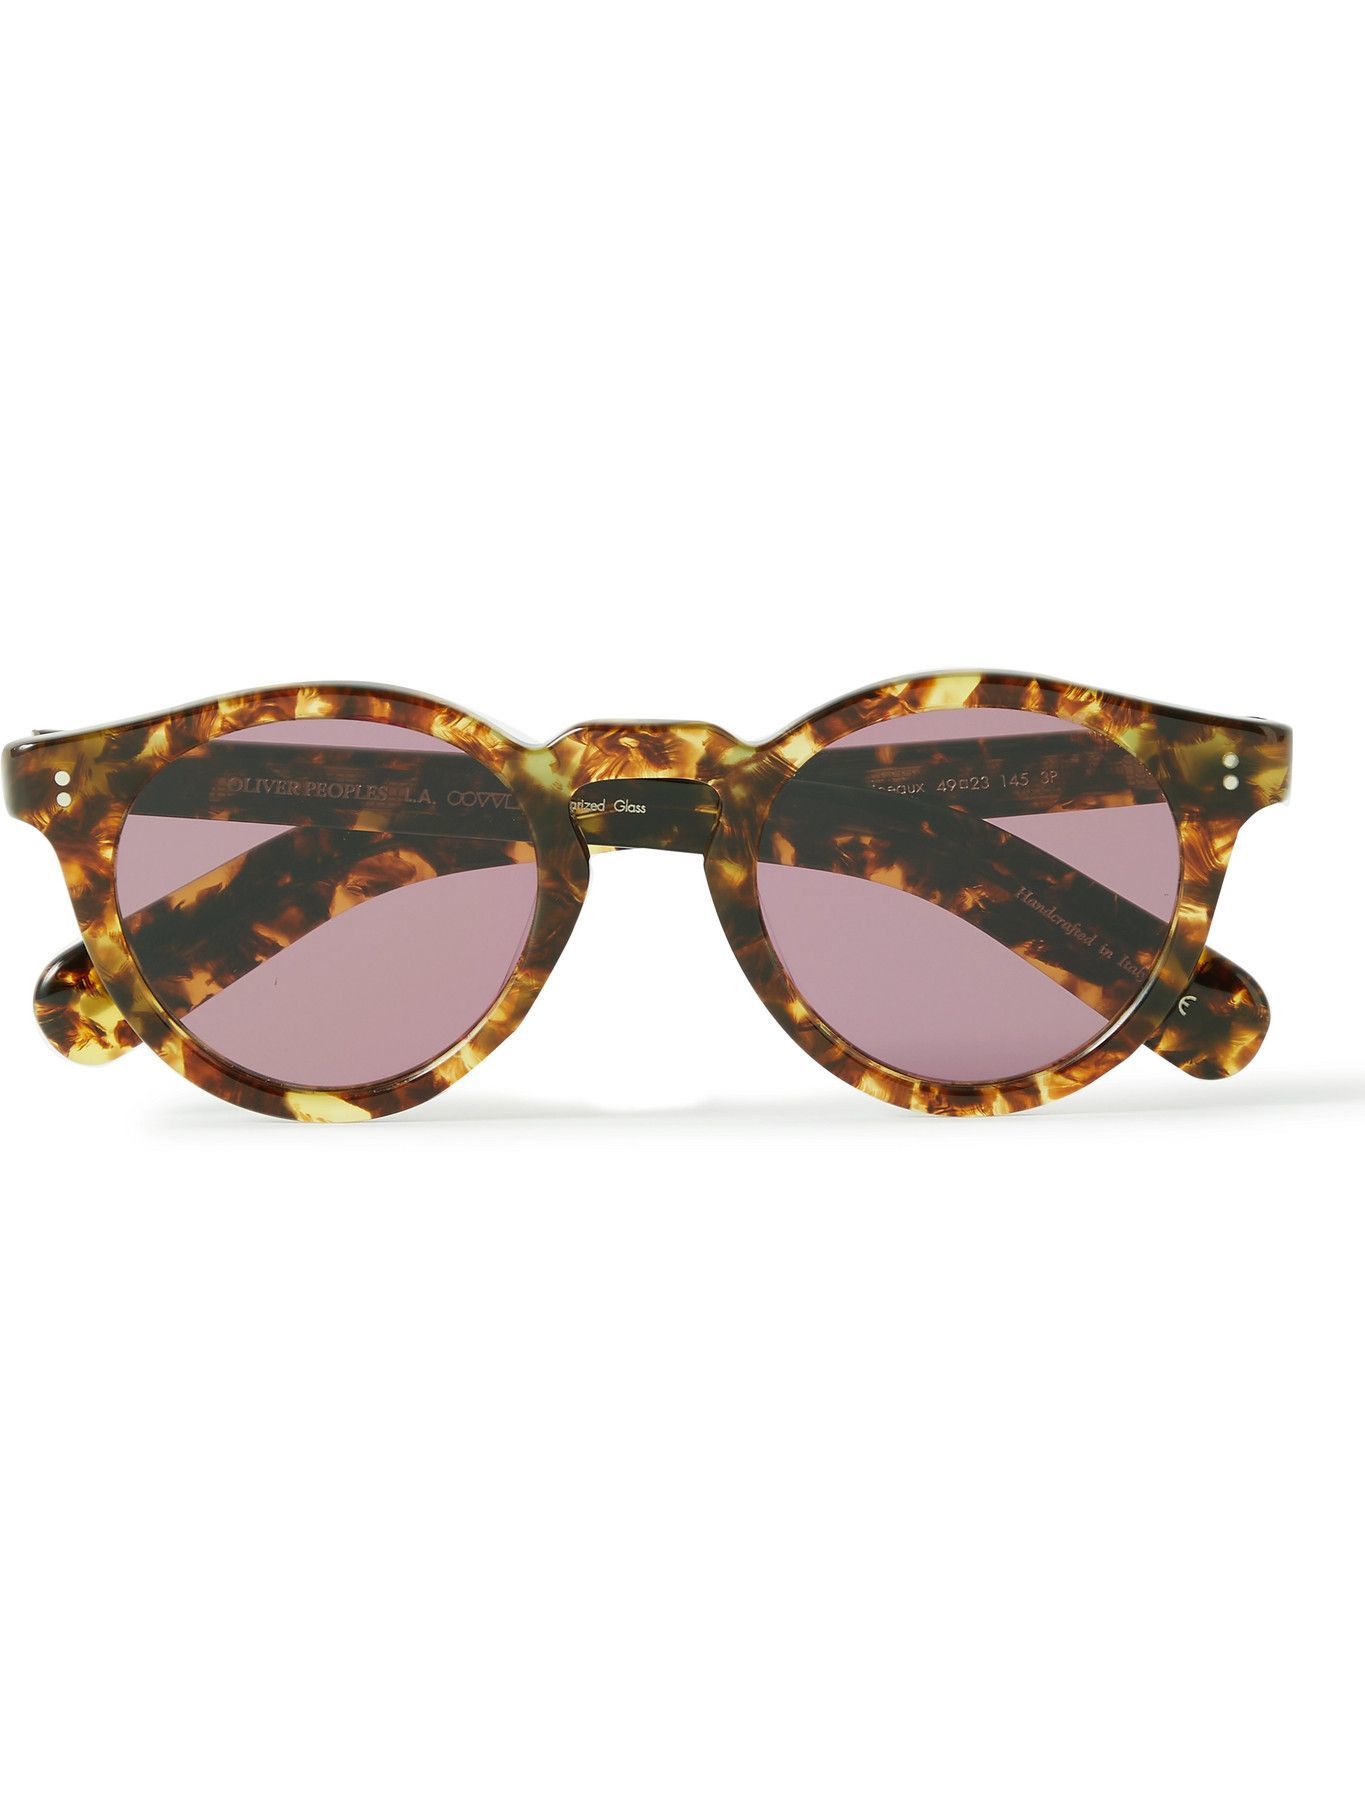 OLIVER PEOPLES - Martineaux Round-Frame Tortoiseshell Acetate Sunglasses Oliver  Peoples